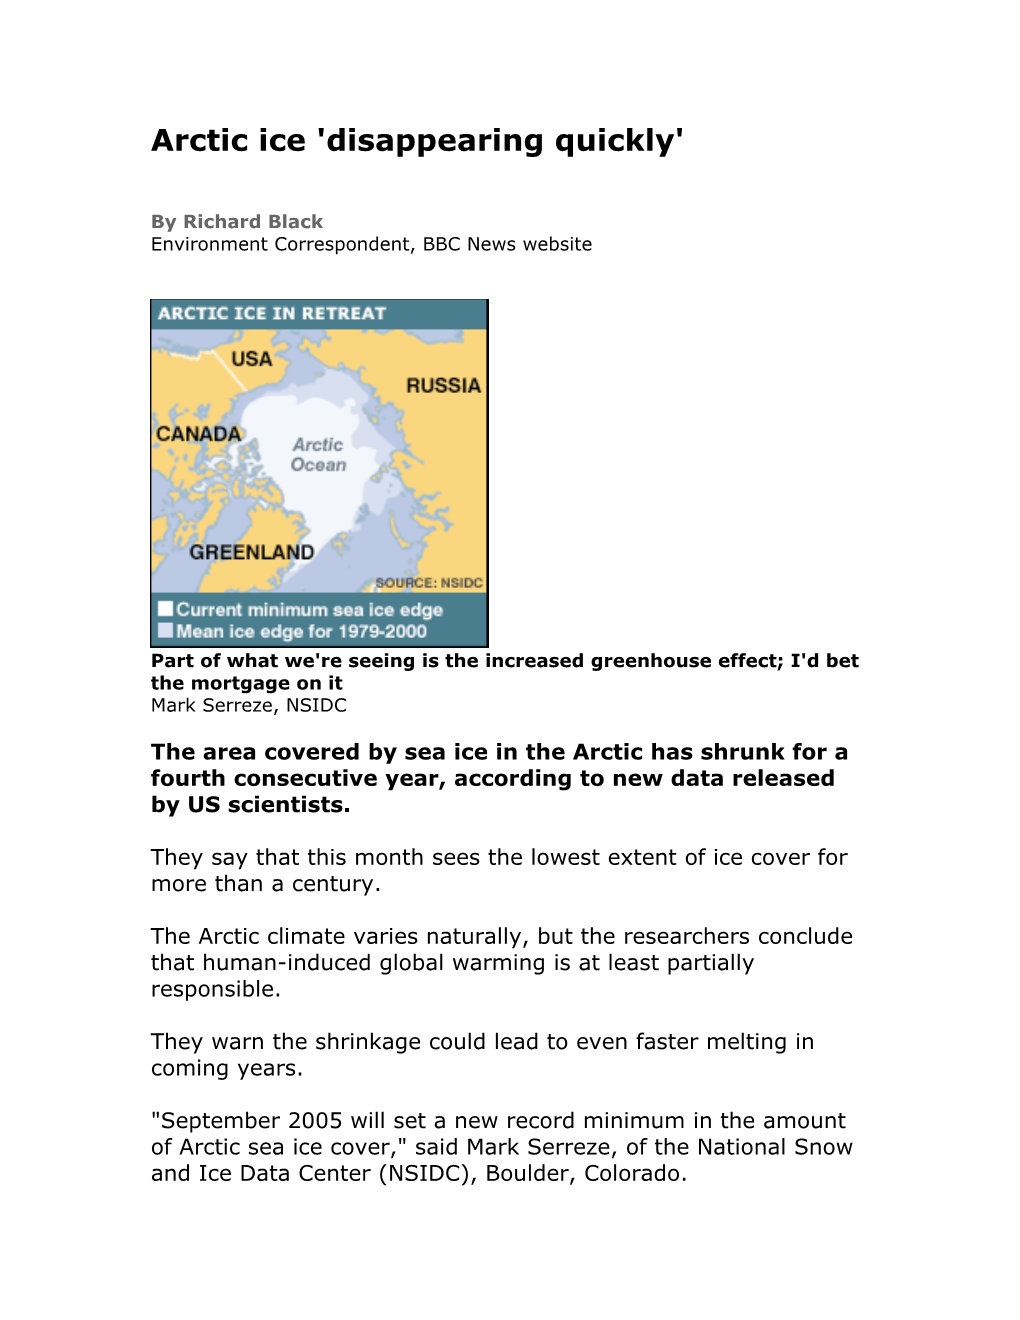 Arctic Ice 'Disappearing Quickly'